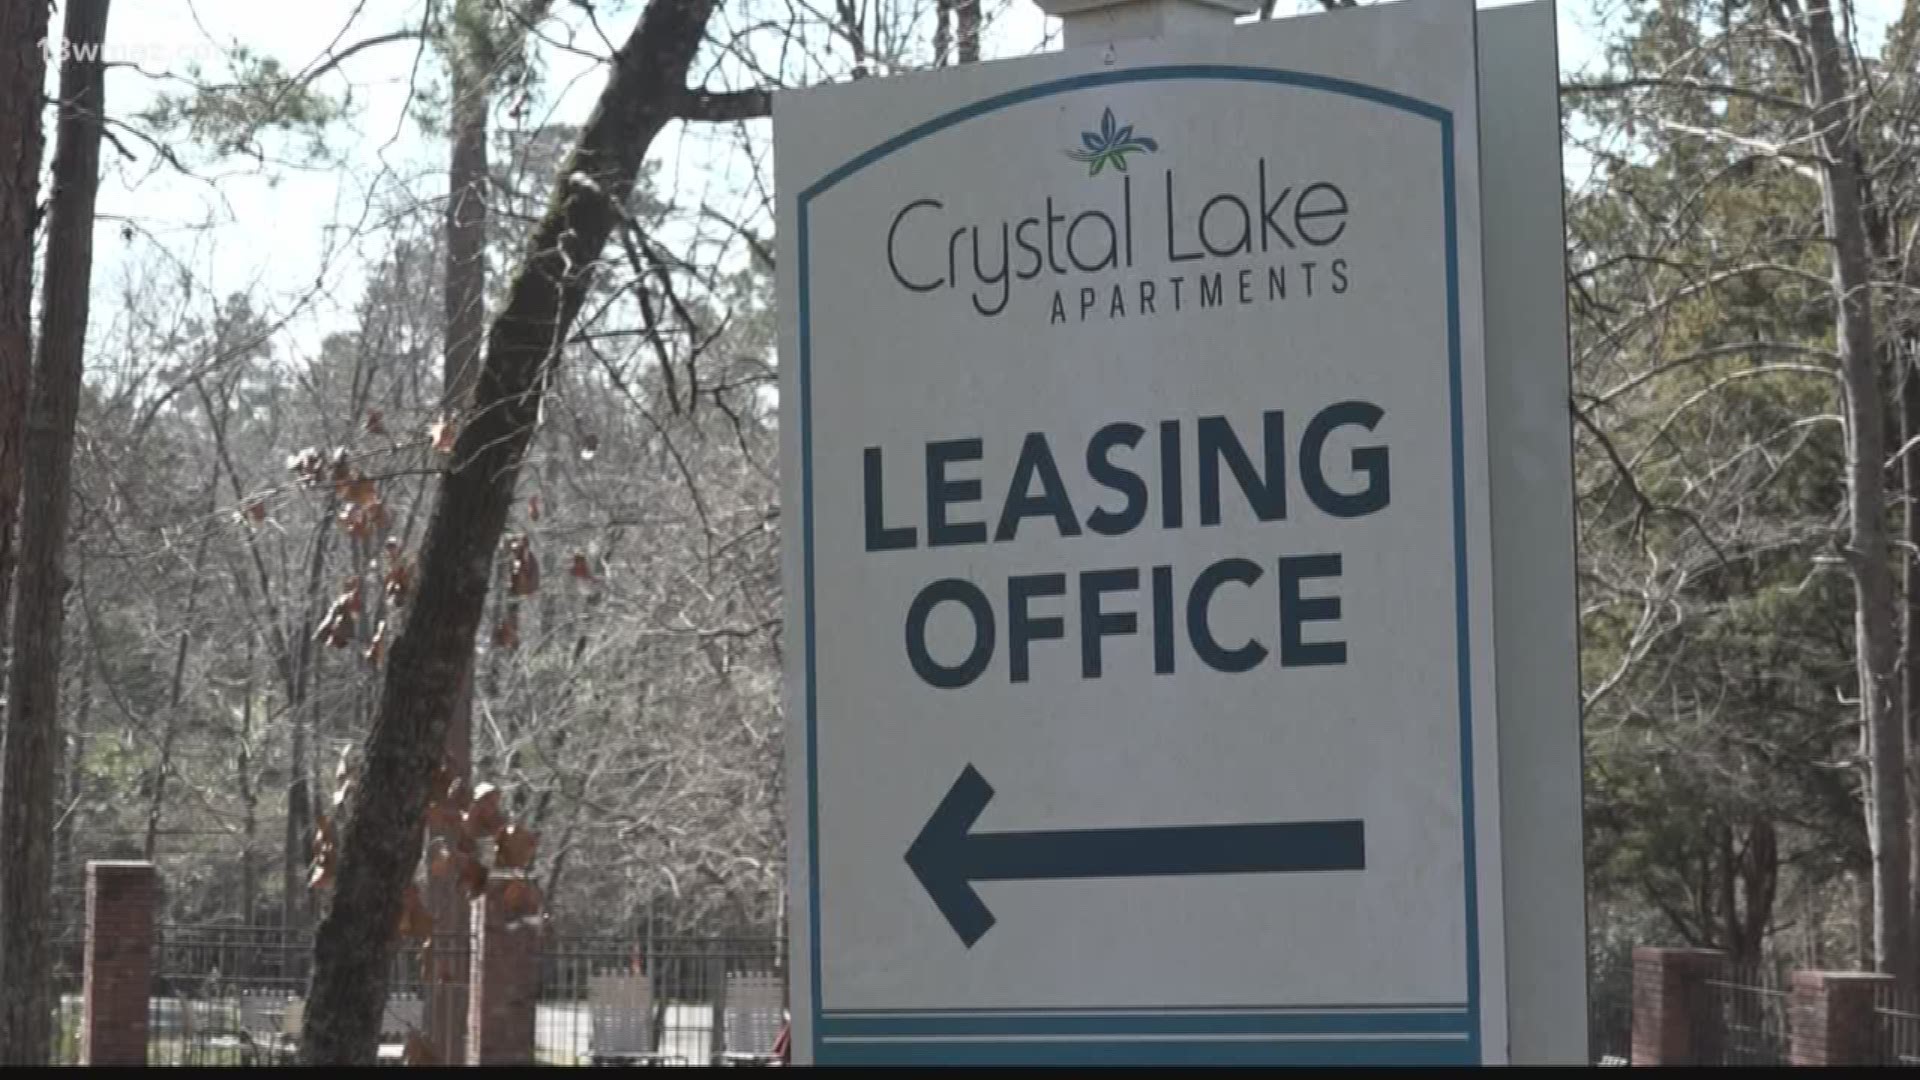 Crystal Lake Apartments still without water, power